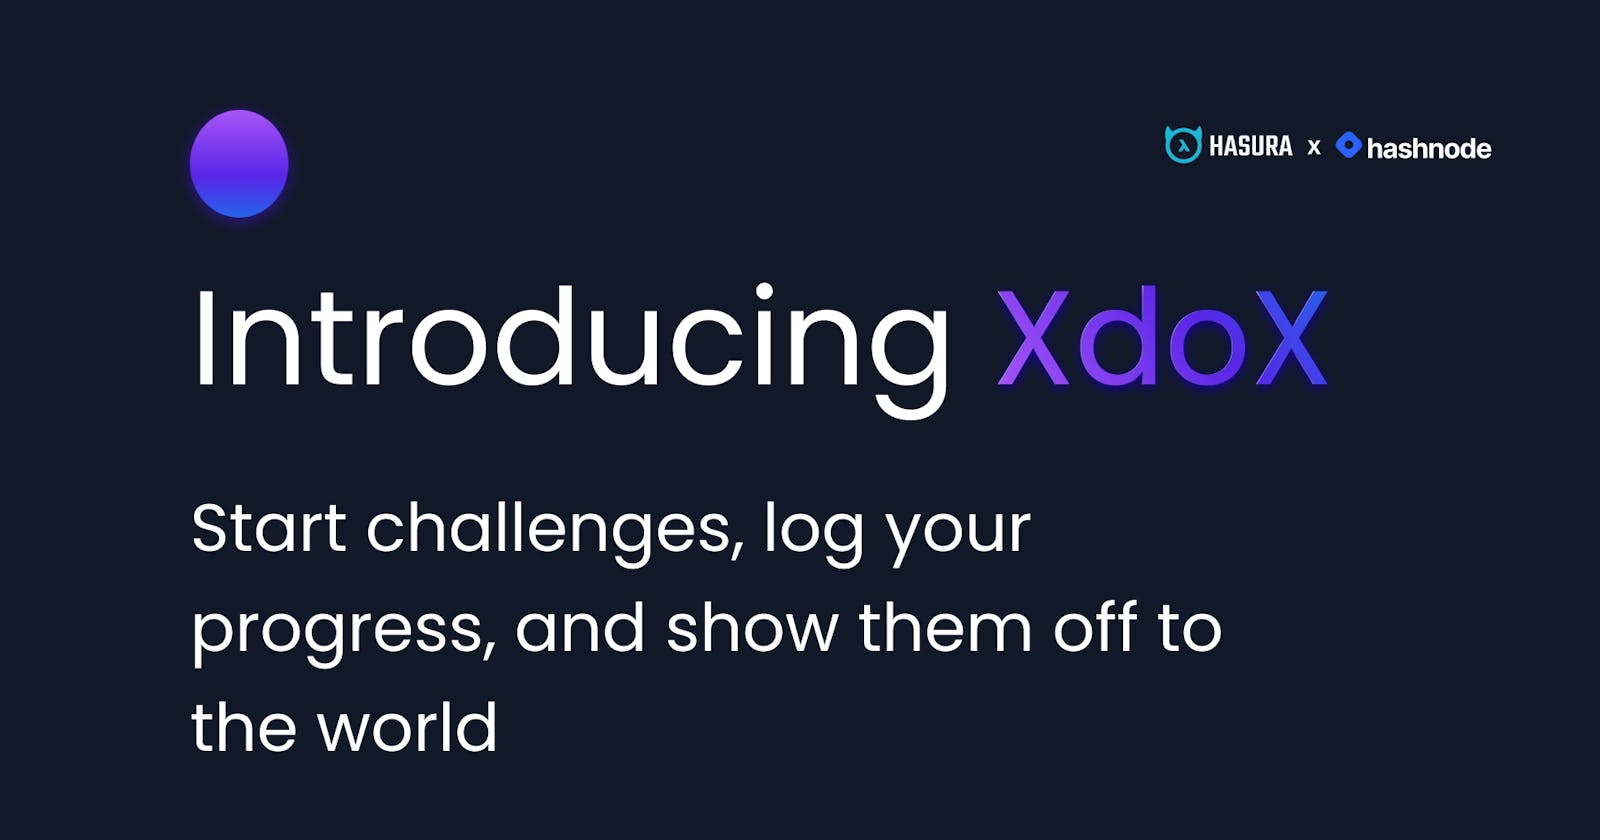 Introducing XdoX - Start Challenges, Log your Progress and Show them off to the World